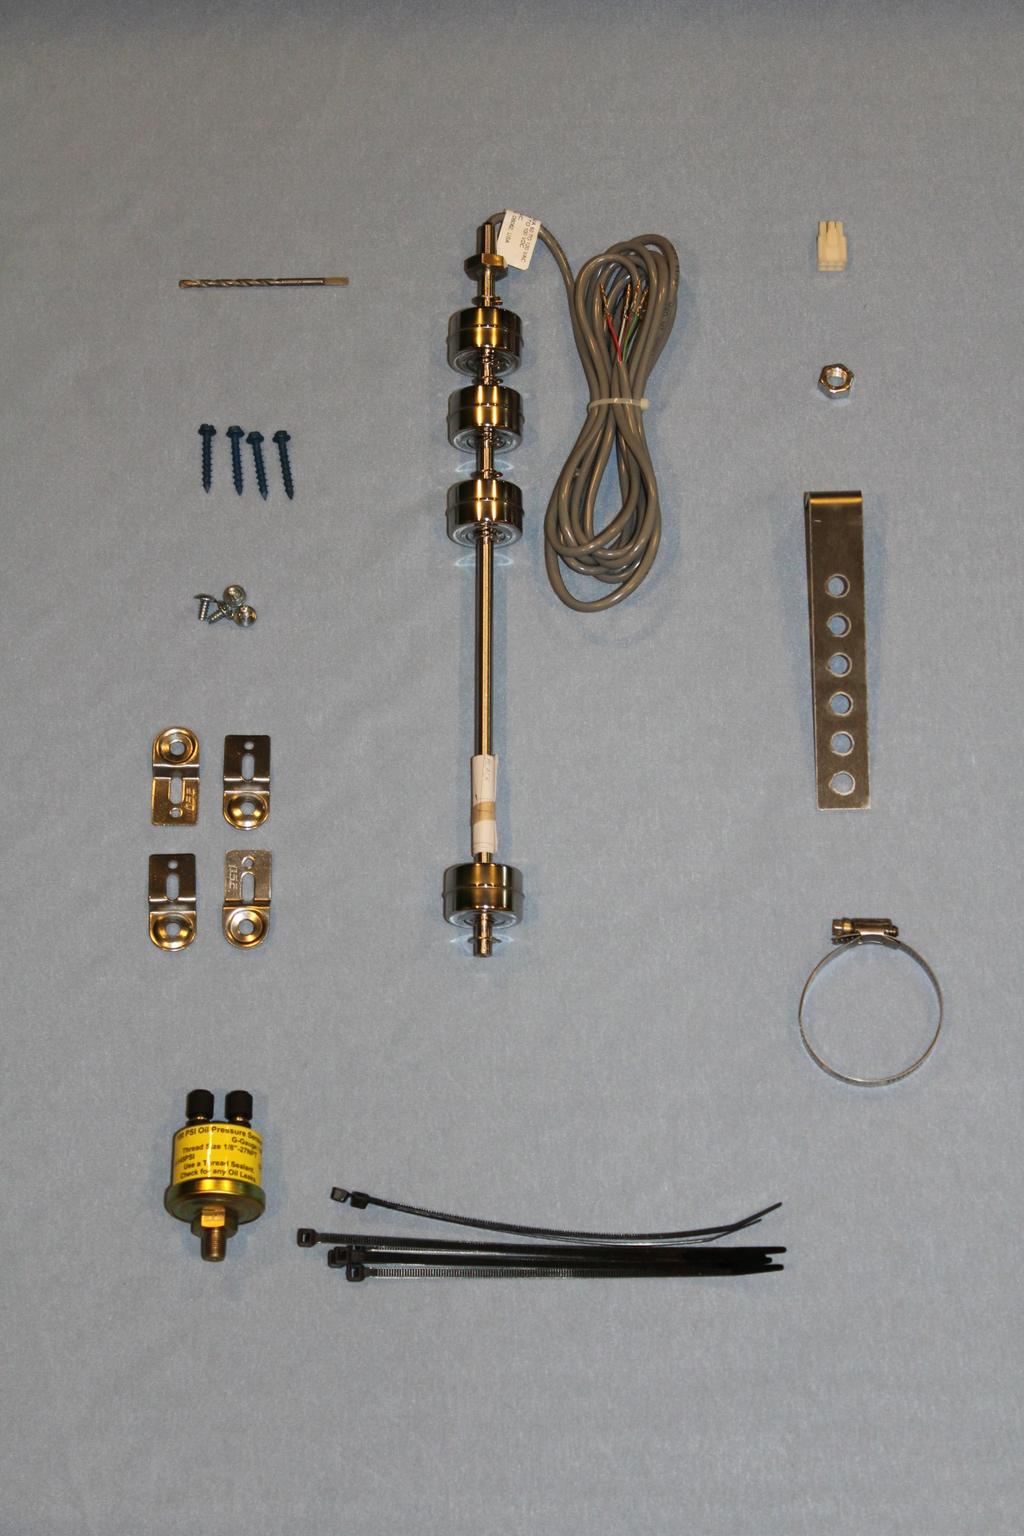 Woda-Sci System Installation Parts Set 5/32 x 3 ½ Drill Bit - 5 Connector Body - 7 3/8 Locking Nut - 8 3/16 x 1 ¼ Concrete Anchors- 4 Mounting Screws - 3 Stainless Steel Hanger - 9 Mounting Brackets